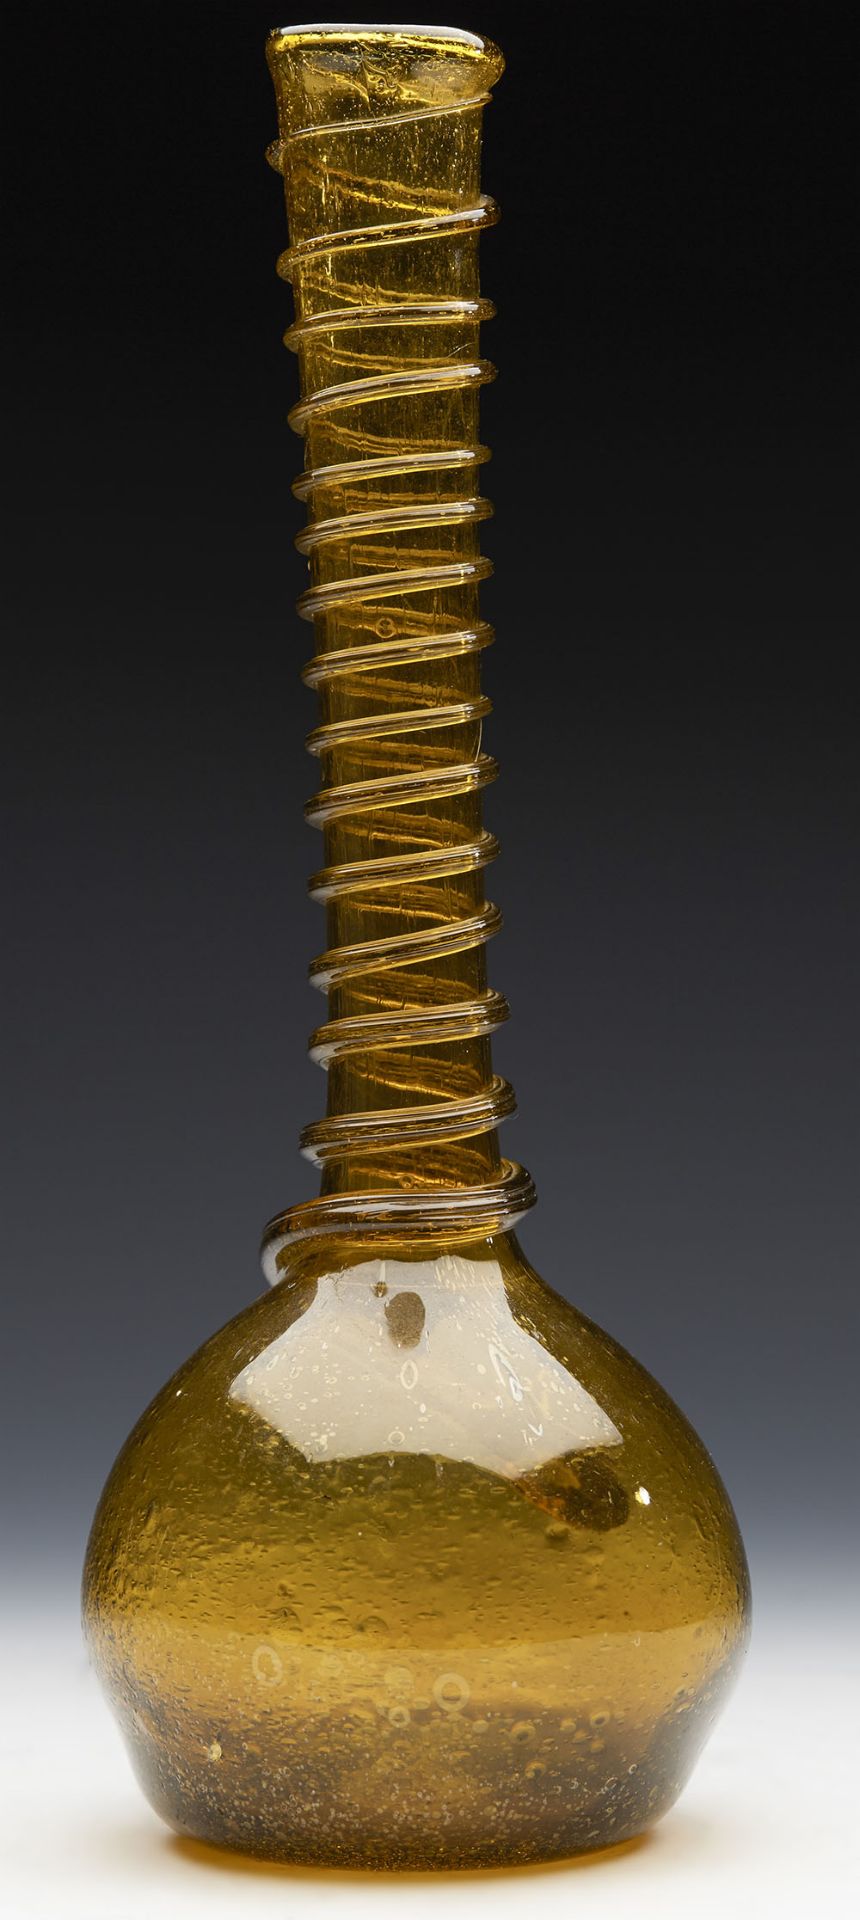 Antique Persian Style Bottle Vase With Coiled Snake 19Th C. - Image 9 of 9